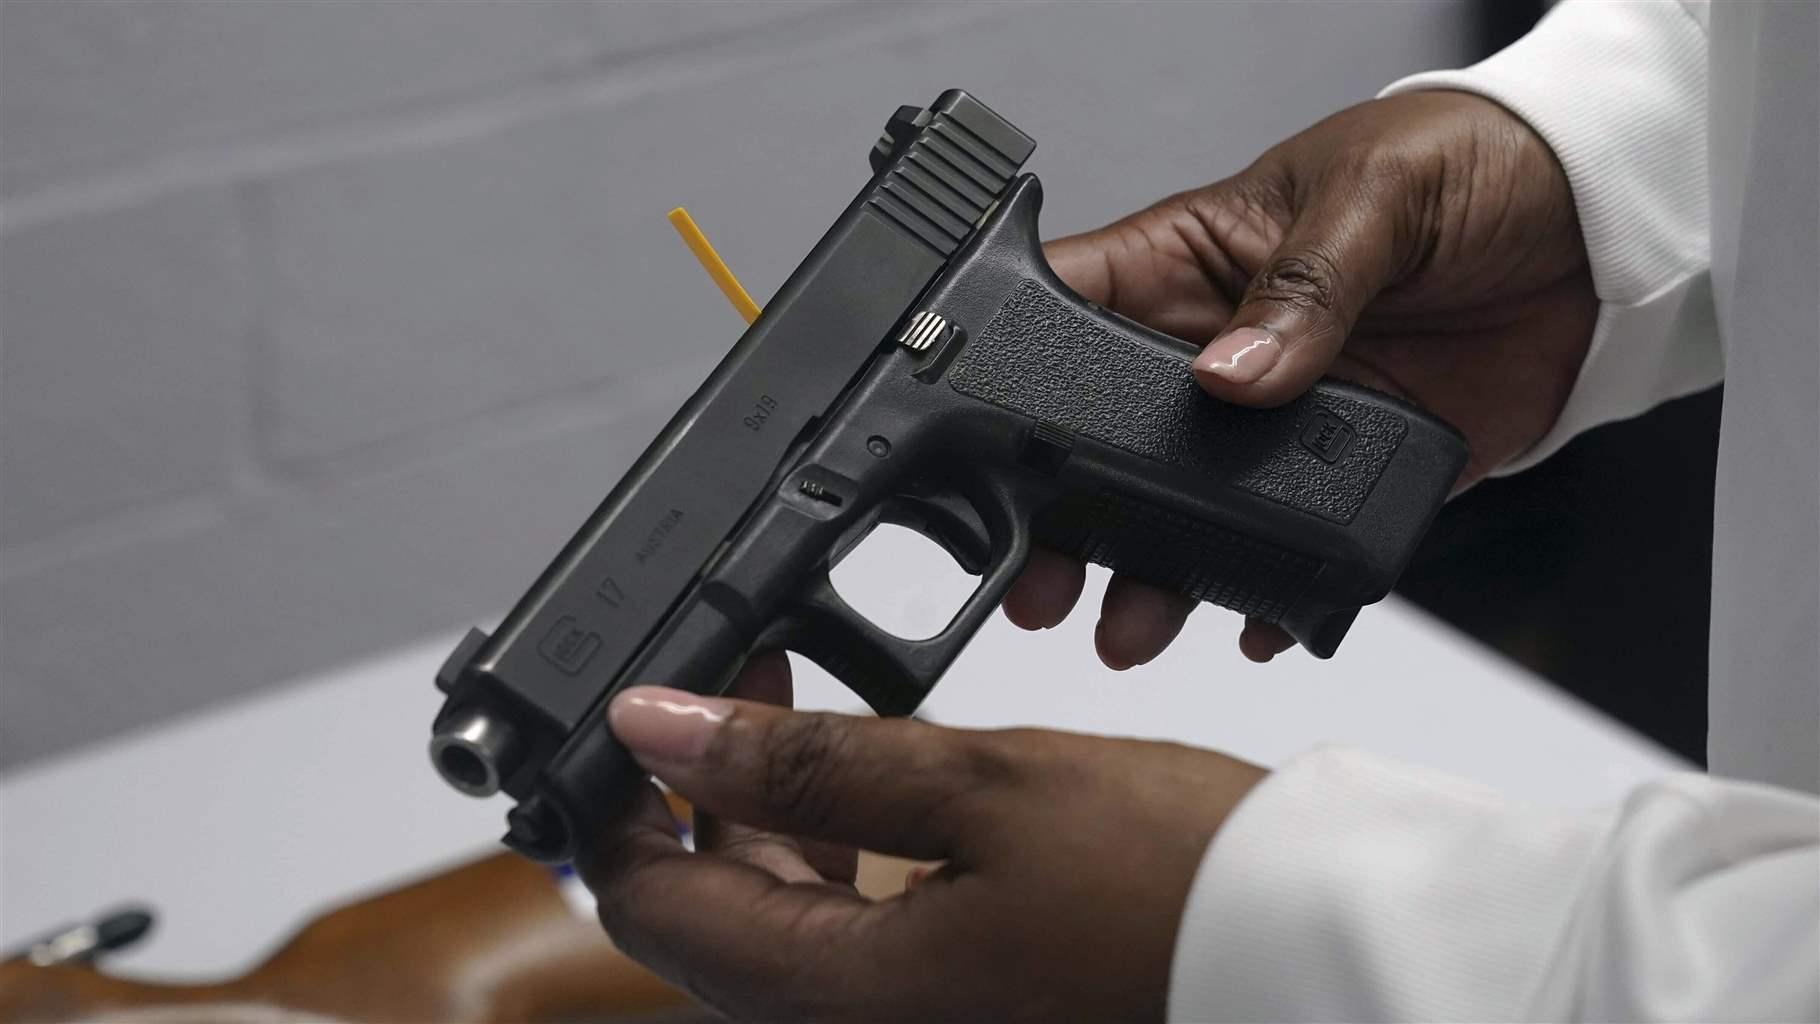 A handgun from a collection of illegal guns is reviewed during a gun buyback event in Brooklyn, N.Y., May 22, 2021.